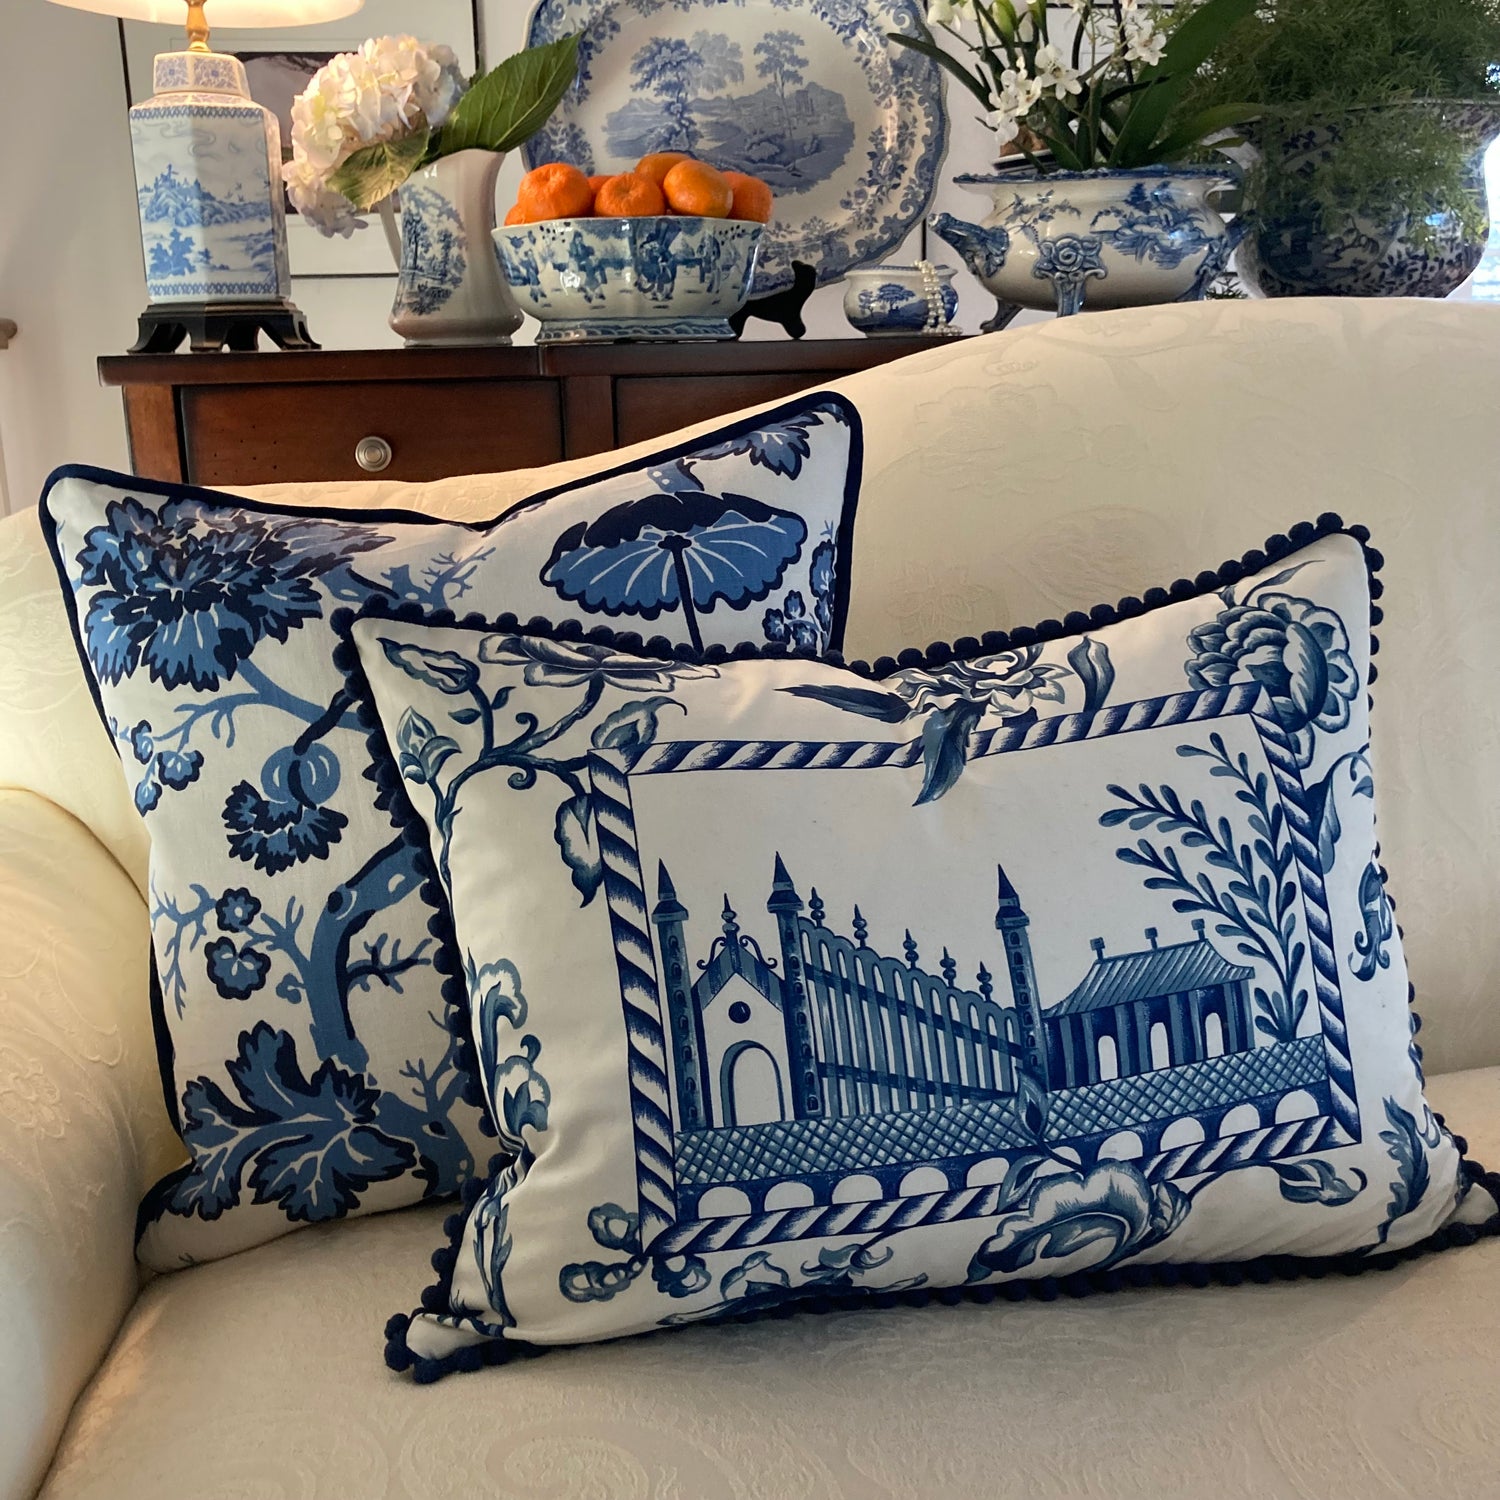 Paradise Chinoiserie Blue & White Toile 20 x 20 Square Decorative Pillow with Down Feather Insert